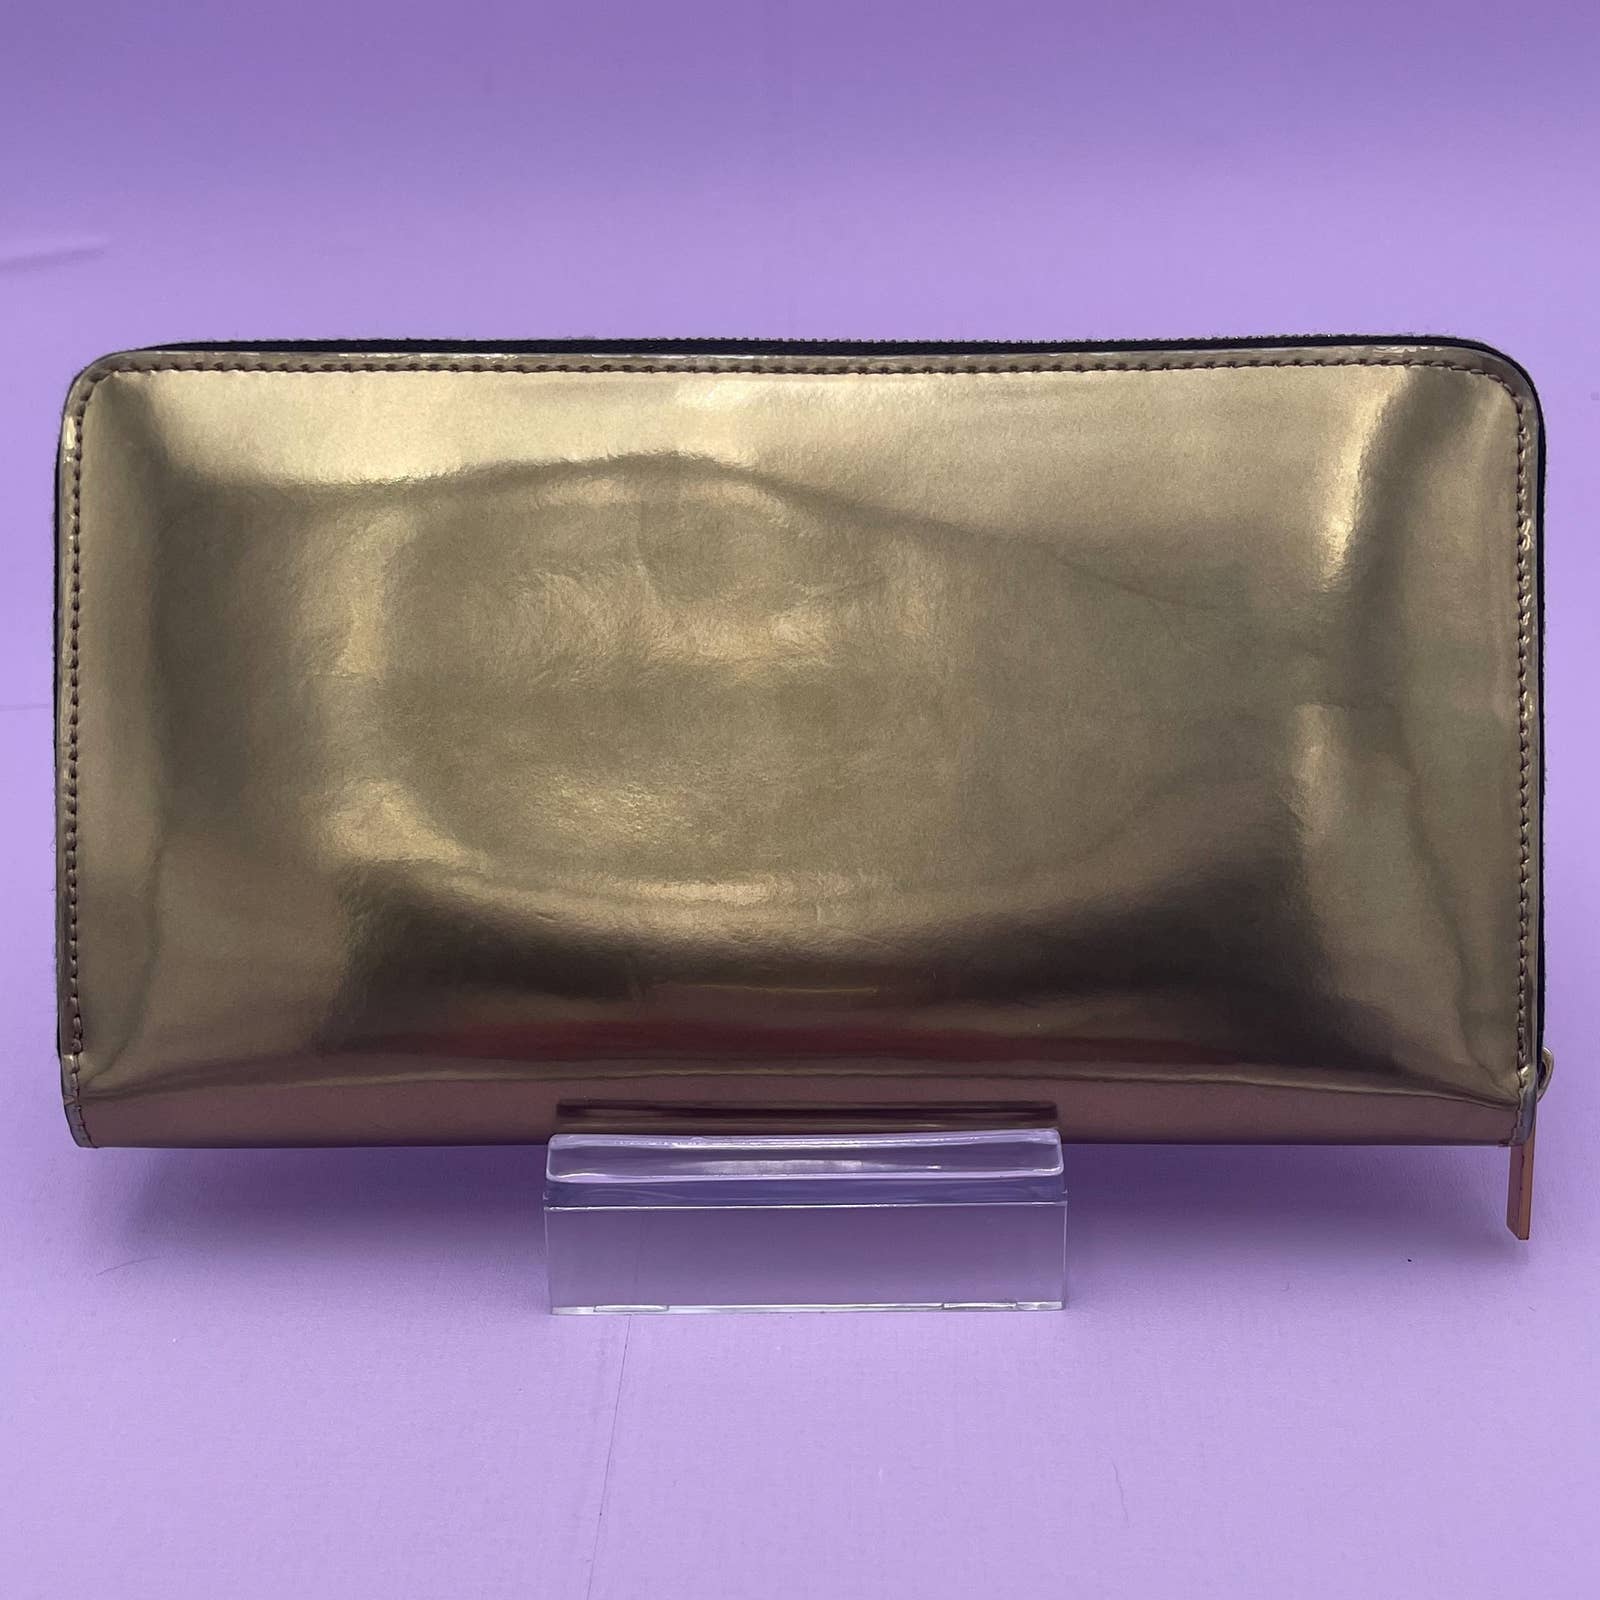 The image shows a shiny, metallic gold Celine Alphabet Wallet Gold with a zipper closure. Made of patent leather, the wallet is standing upright on a clear stand against a lavender background.